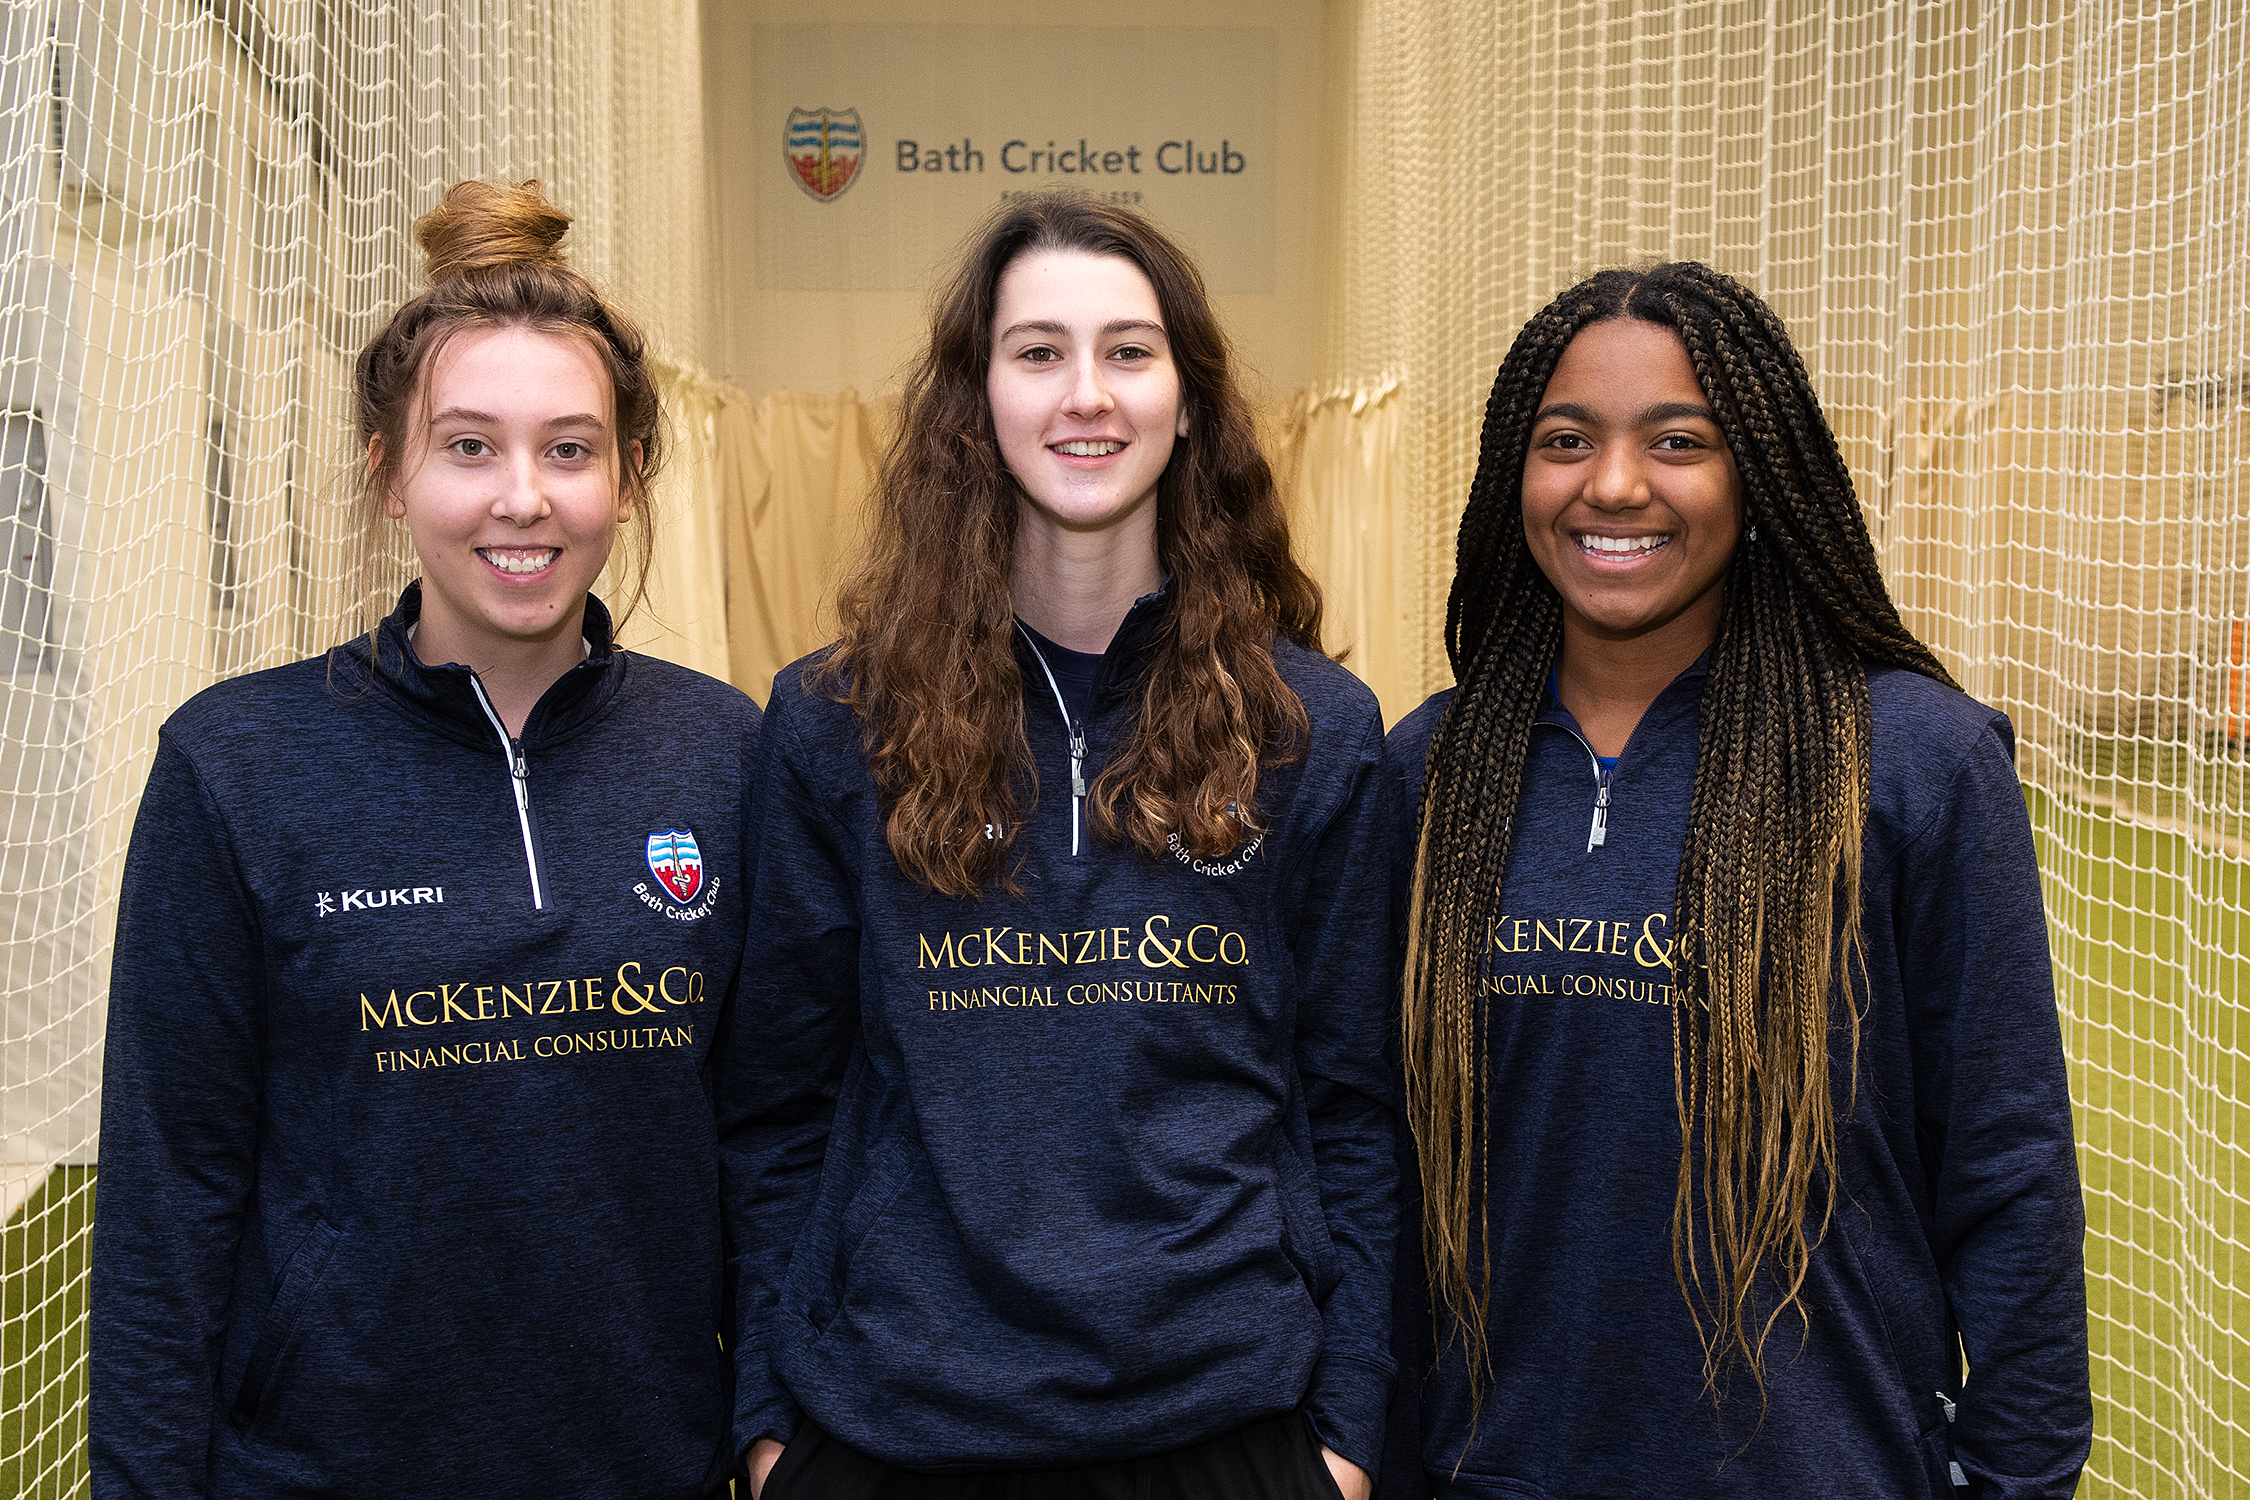 Photo of three female cricketers taken in an indoor training centre